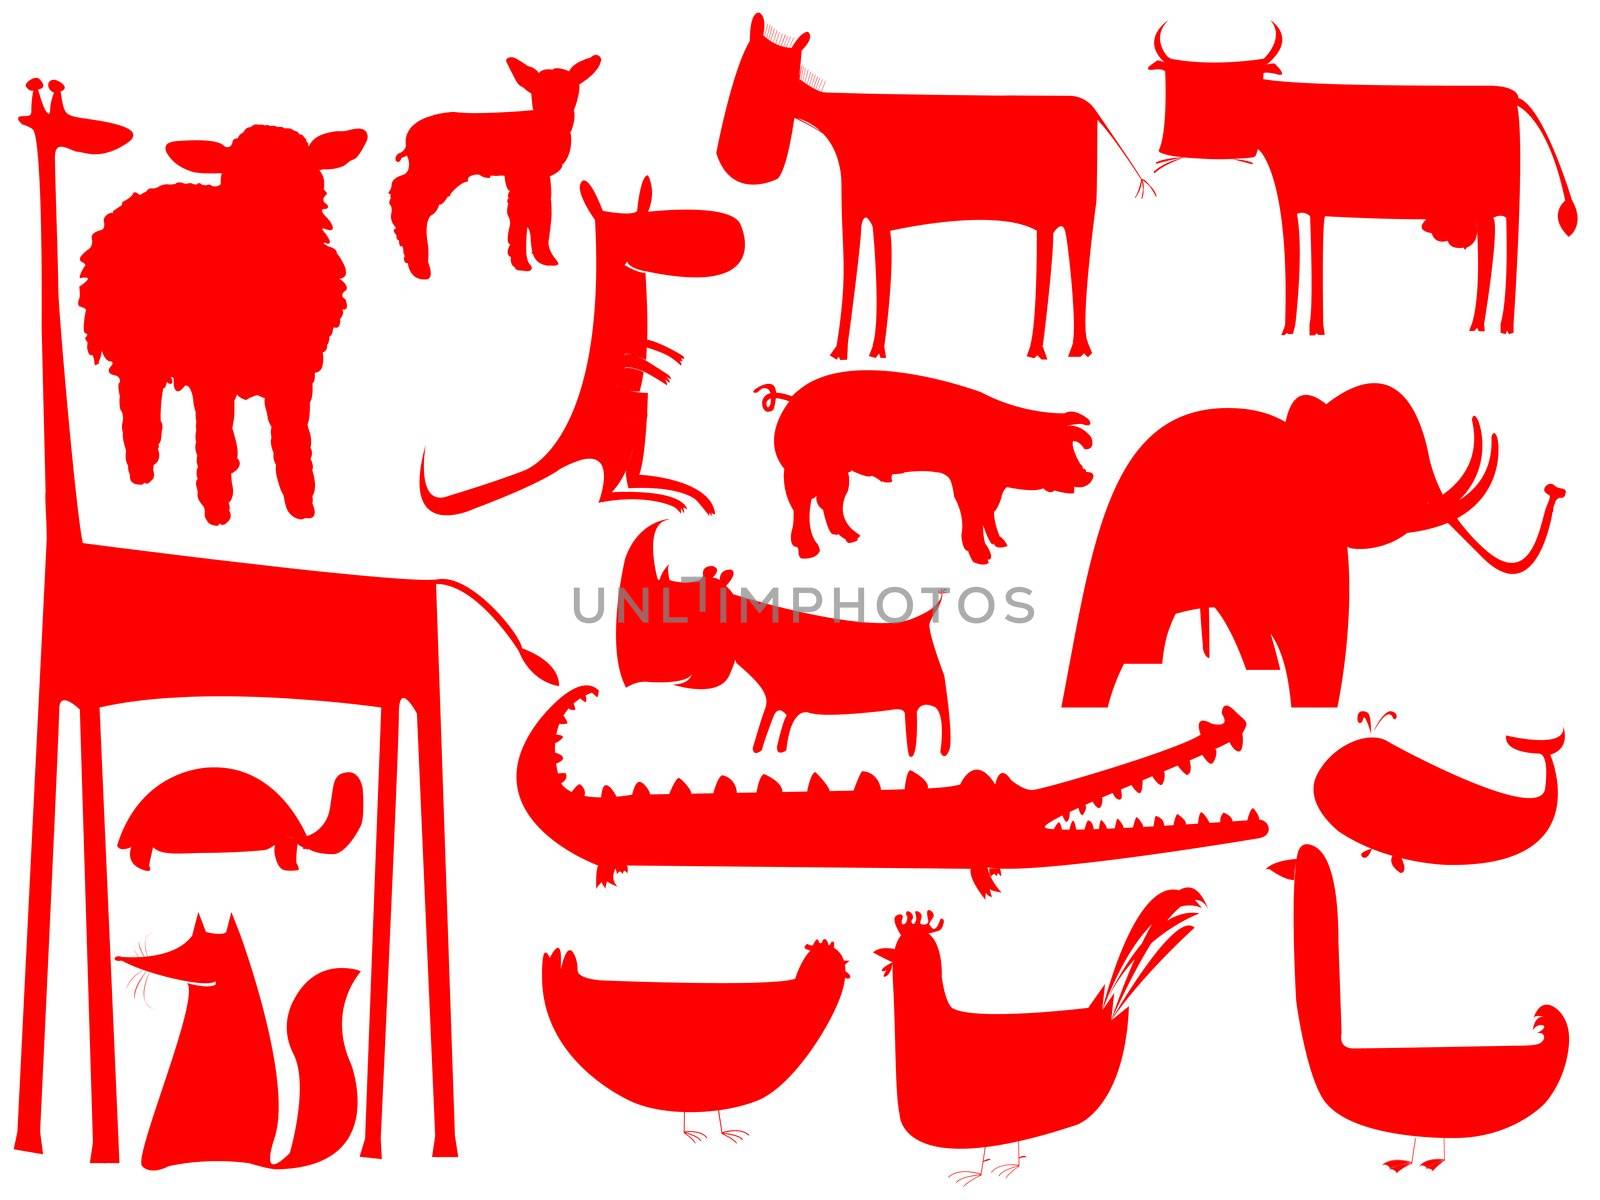 animal red silhouettes isolated on white background, vector art illustration